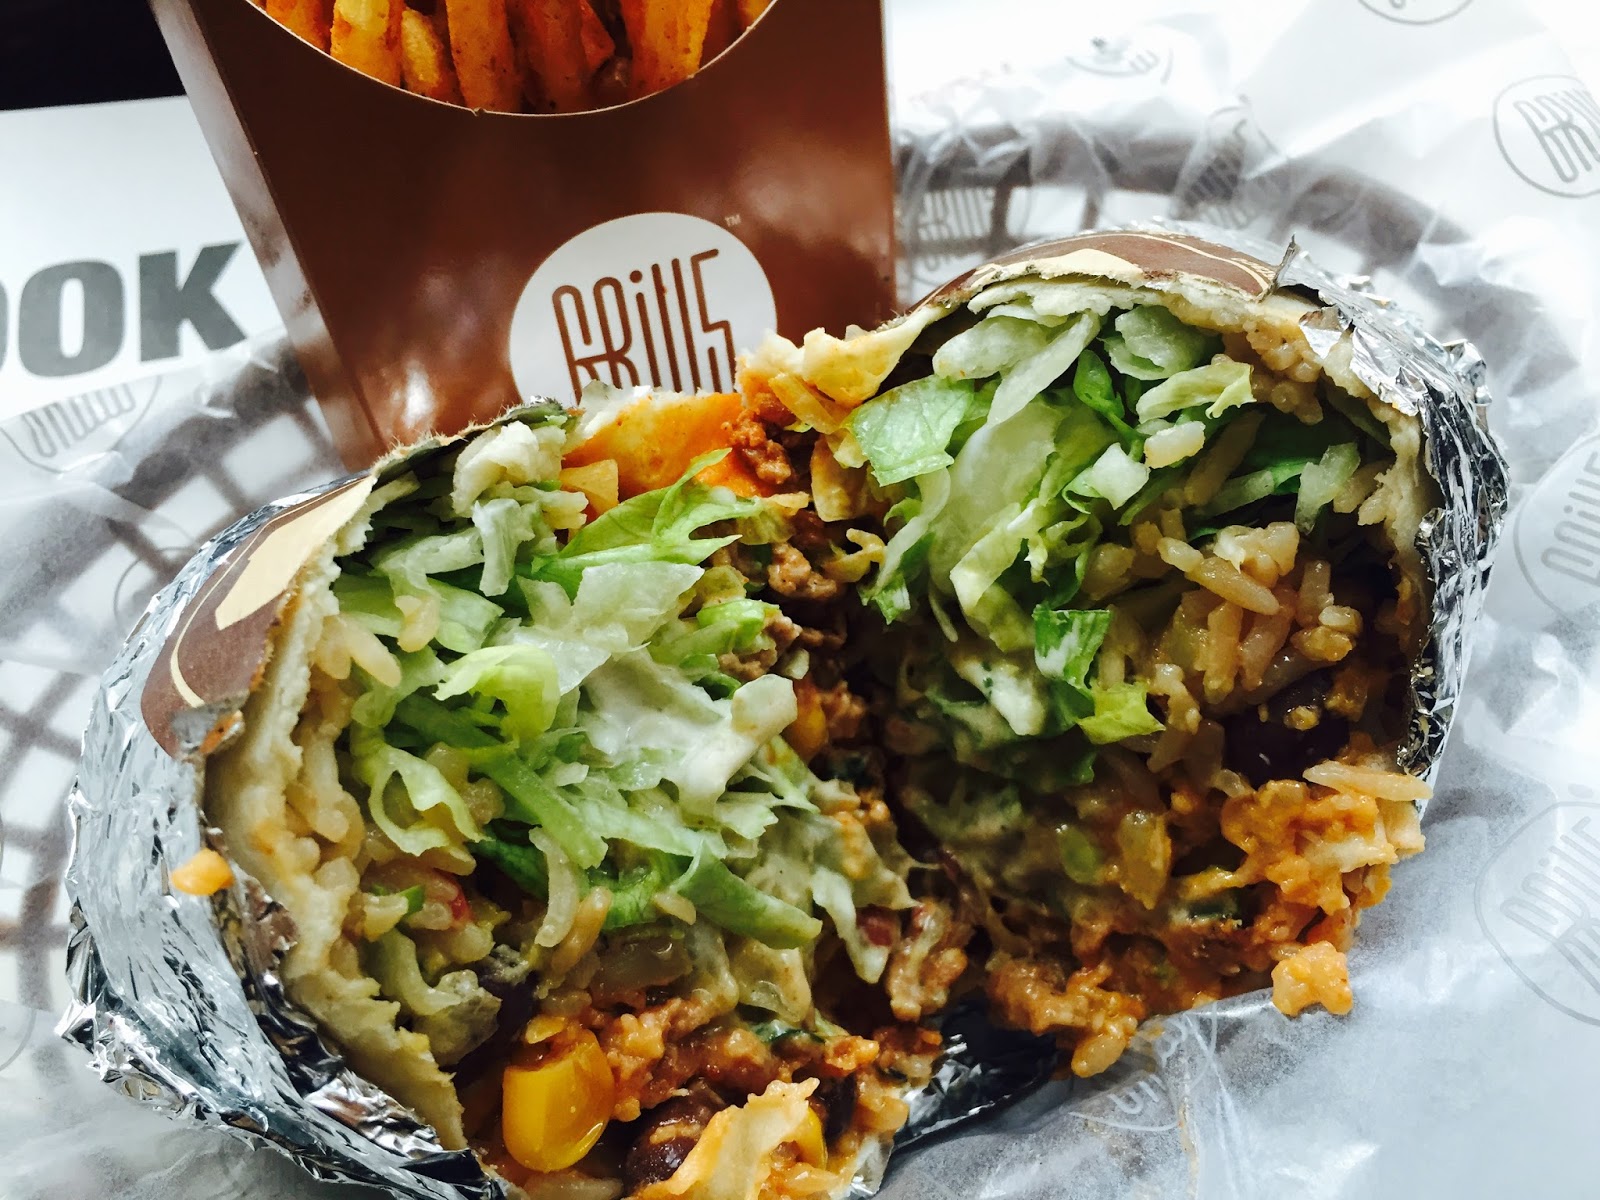 eating all the day ...: grill 5 (aka grill 5 taco)